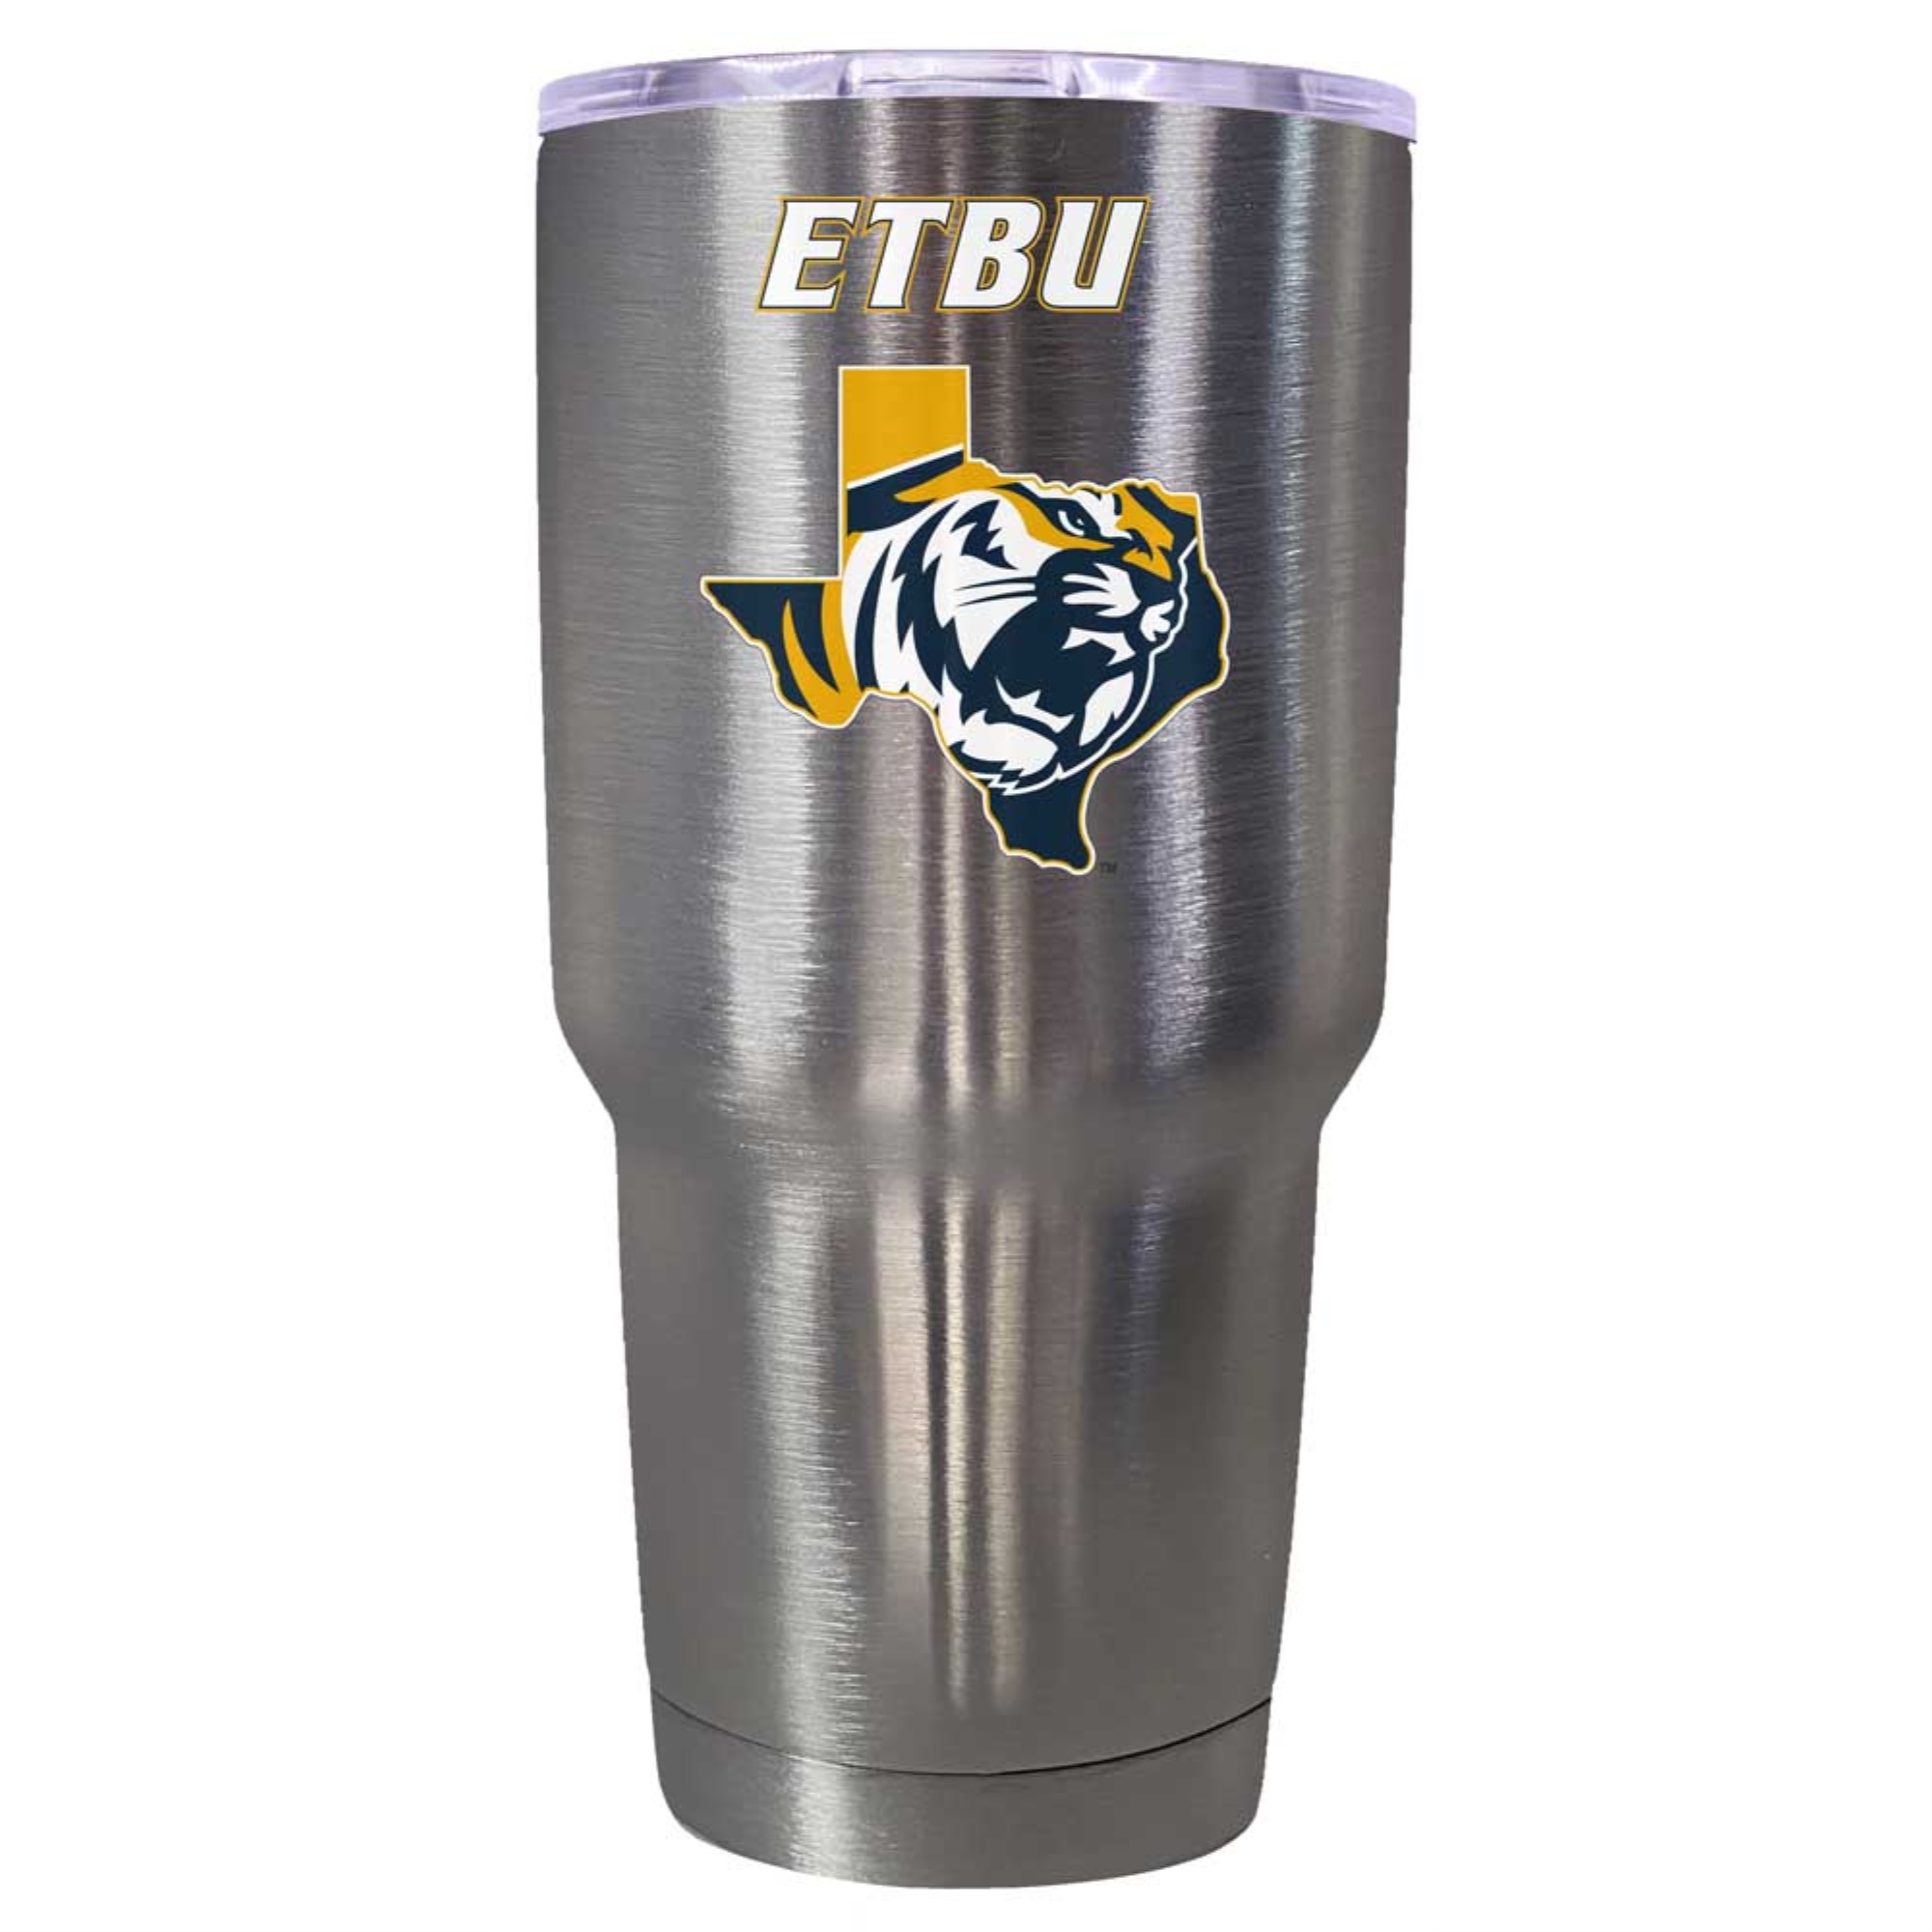 R and R Imports East Texas Baptist University 24 oz Insulated Stainless Steel Tumbler